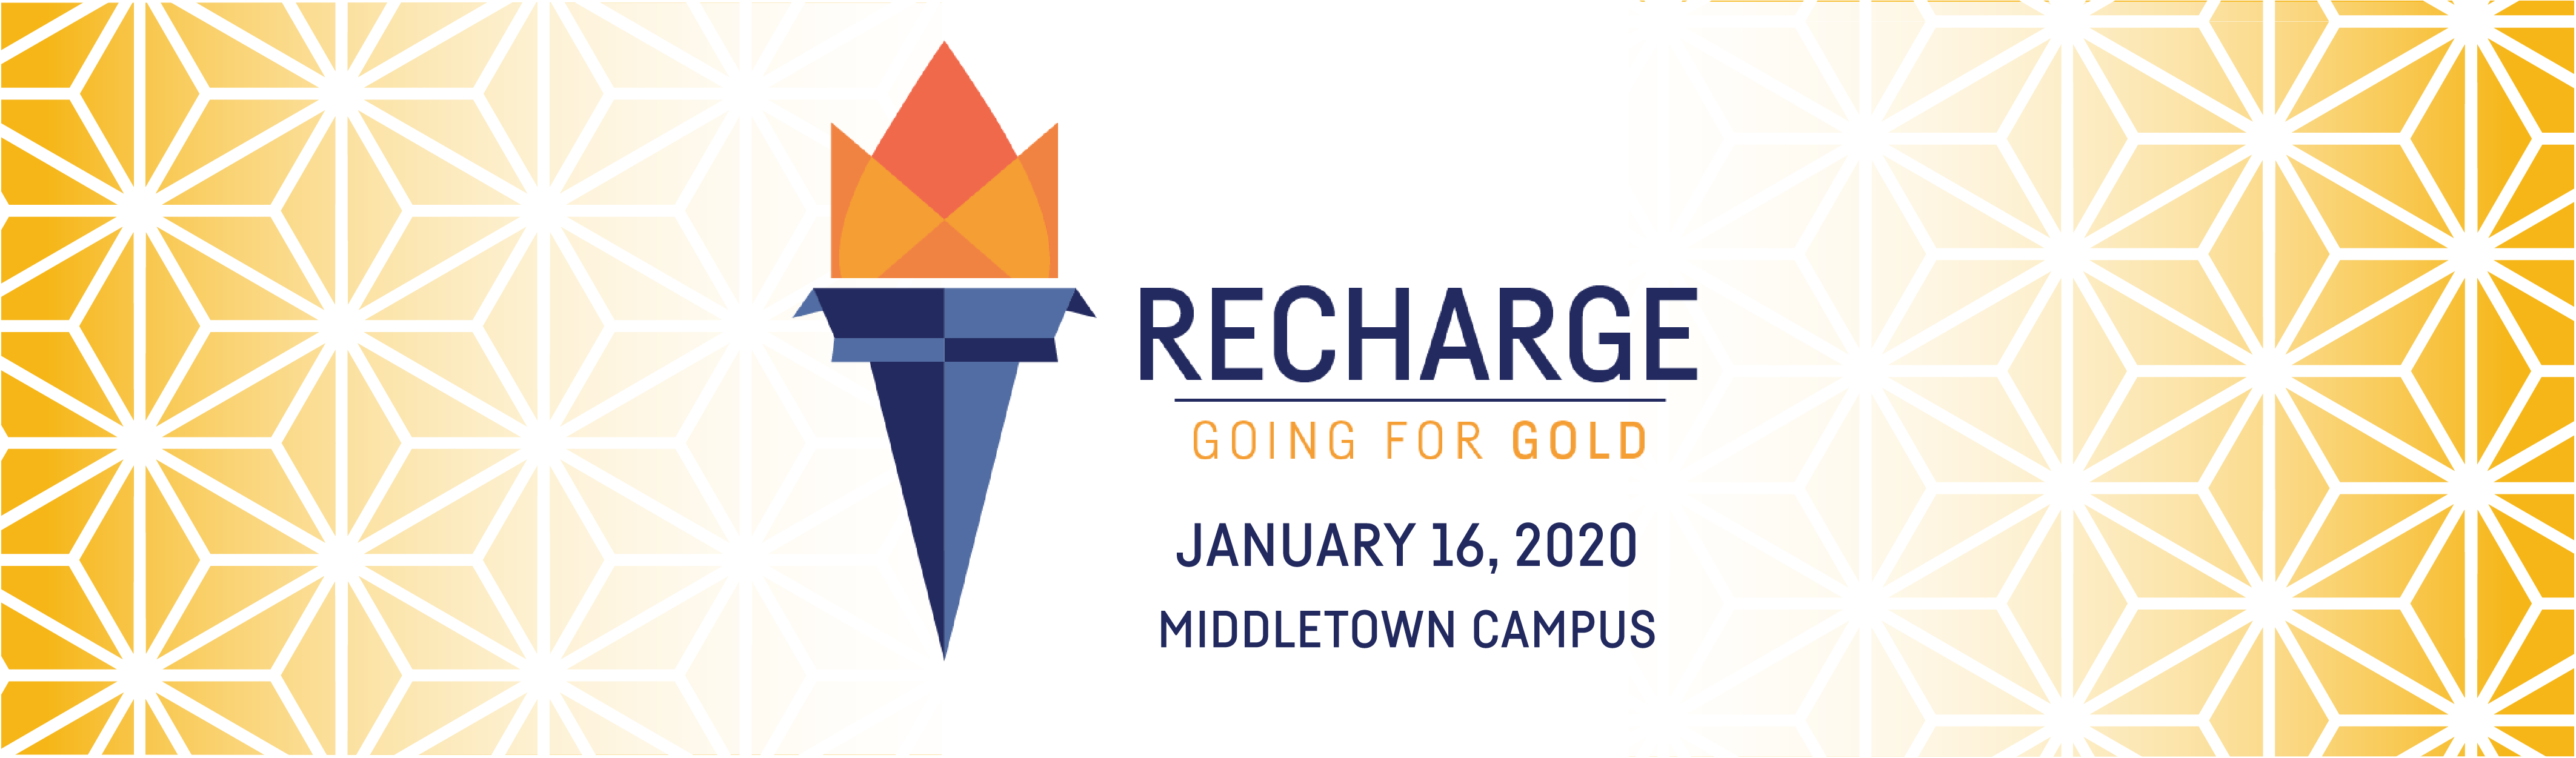 Yellow and white patterned background with a drawing of a blue Olympic torch with orange flames and blue and gold text that reads: Recharge - Going for Gold January 16, 2020 Middletown Campus